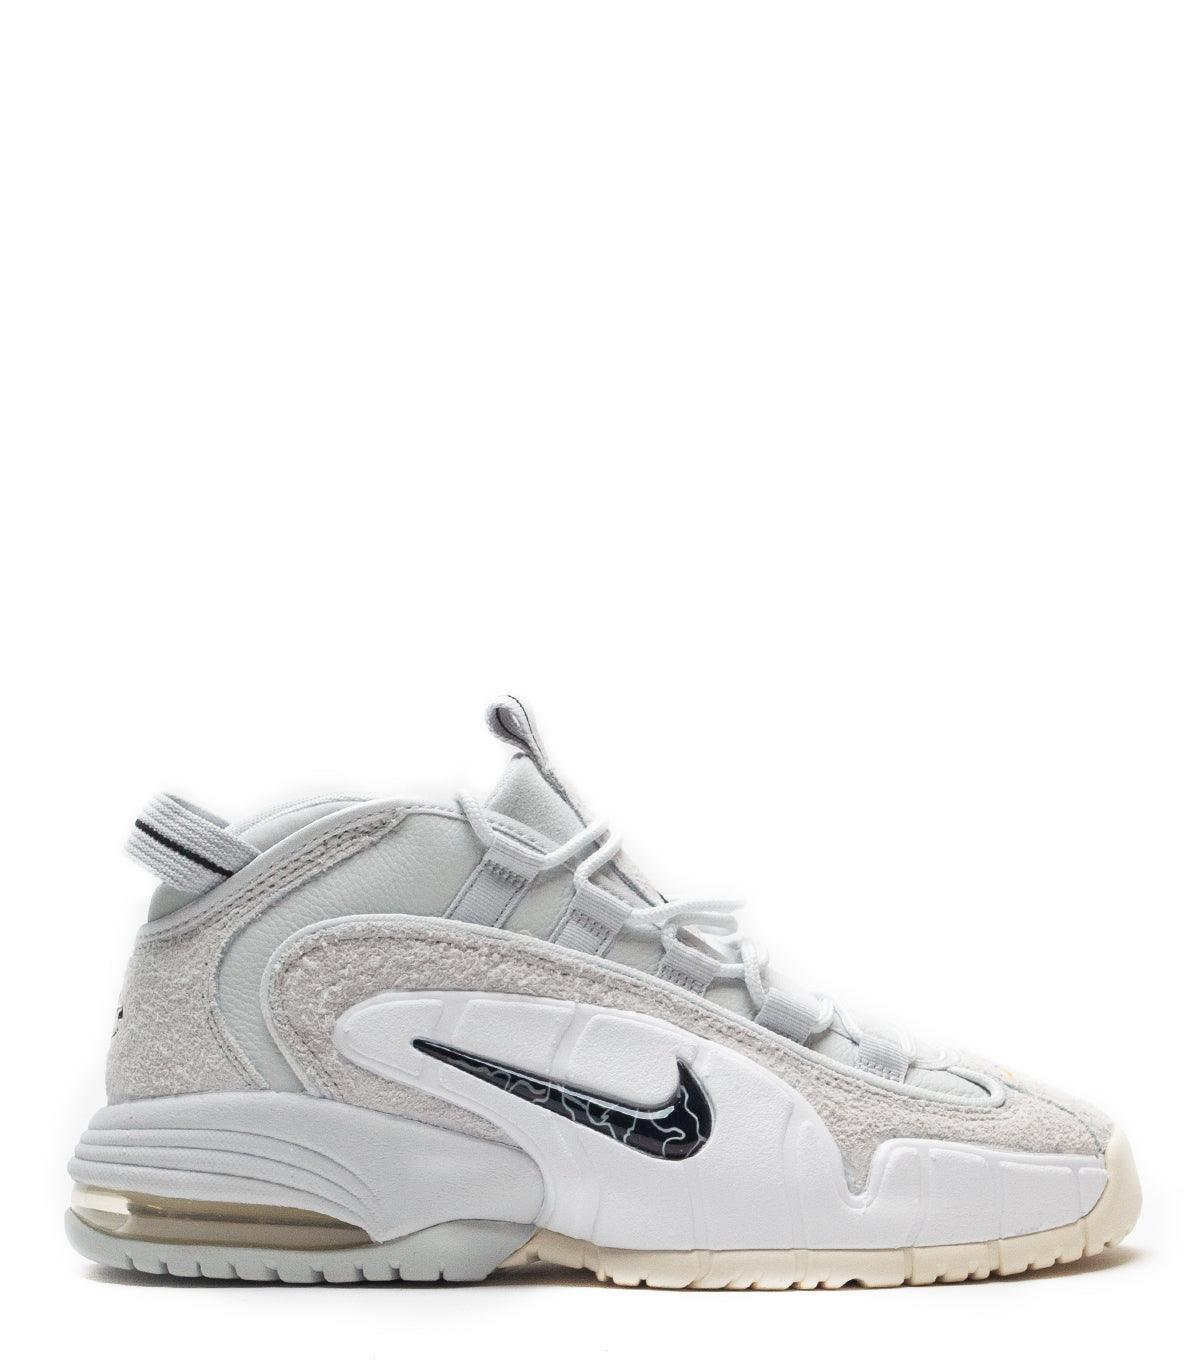 09.08.22 New Air Max Penny 1 White